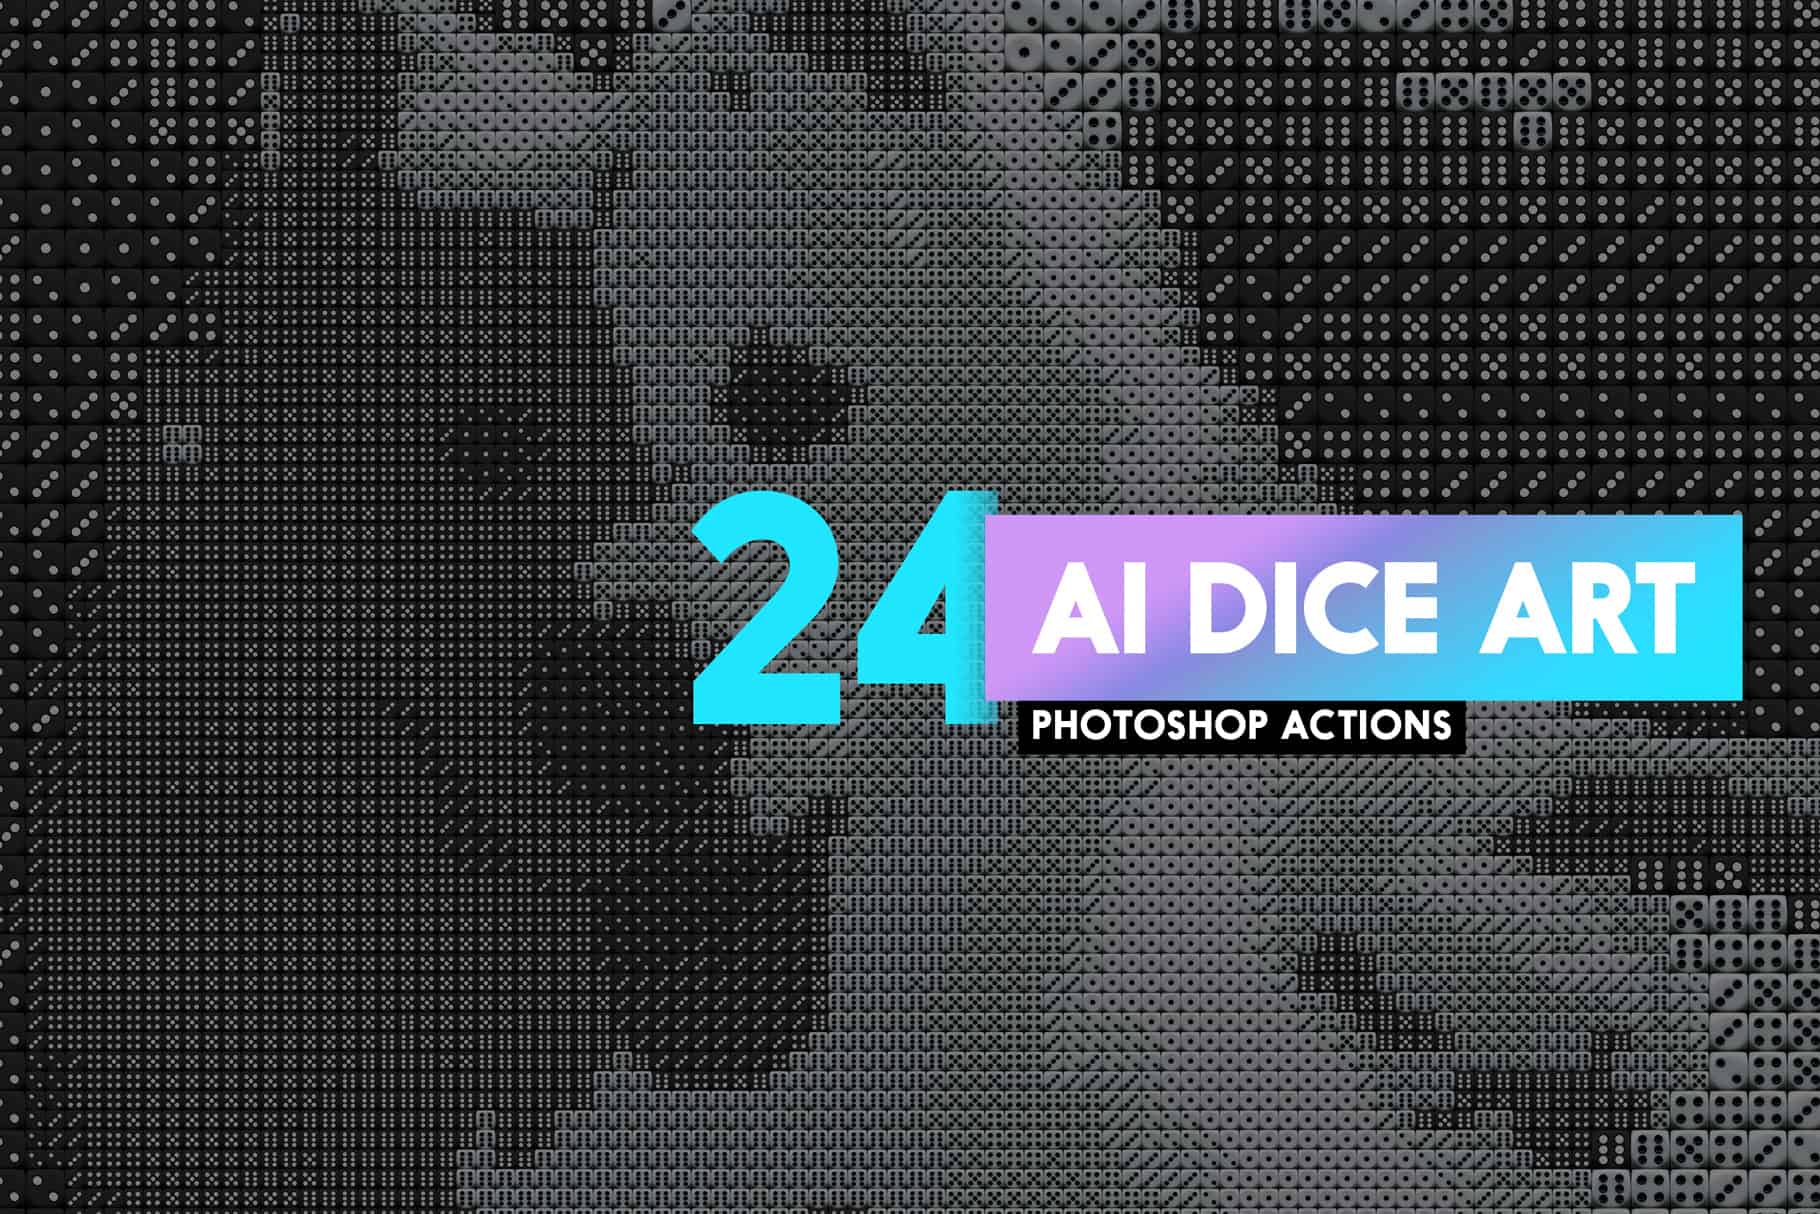 New AI Dice Art Photoshop Actions. Create Images Made From Thousands of Dice